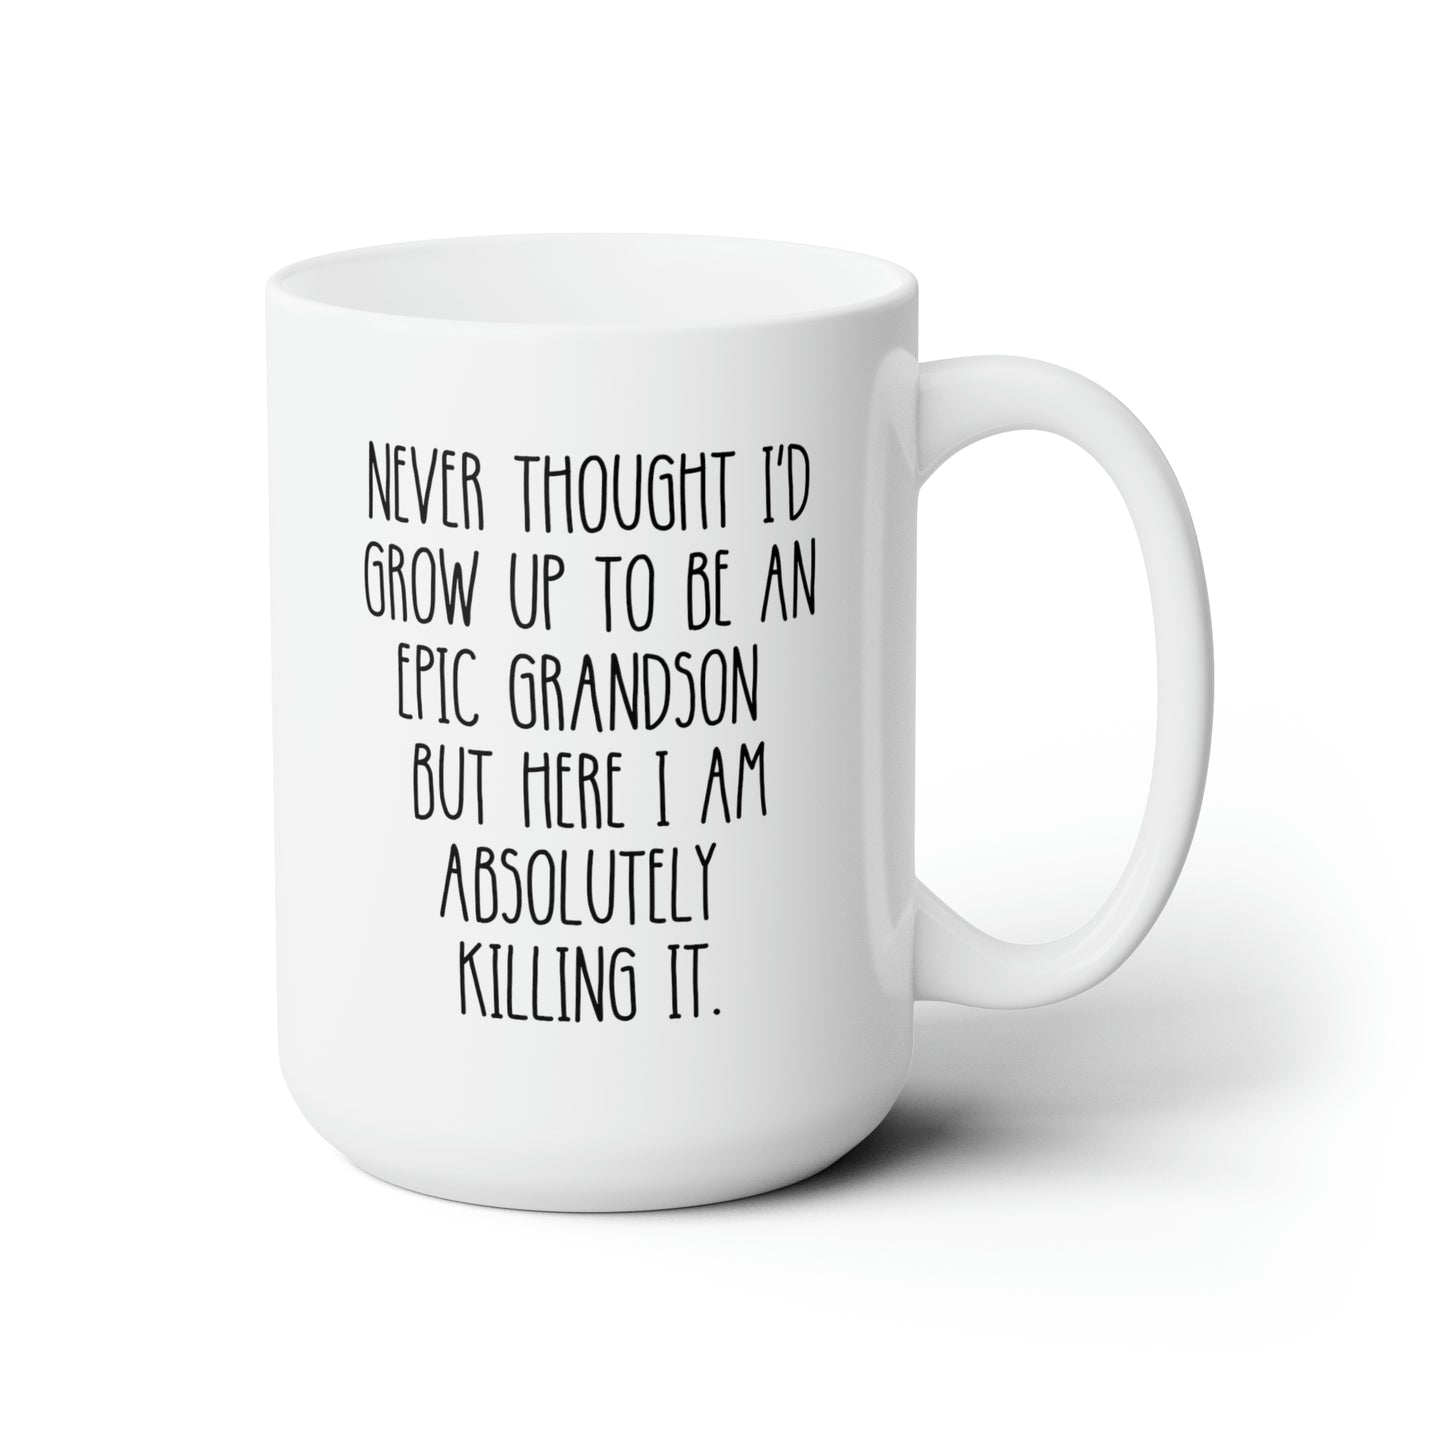 Never Thought I'd Grow Up To Be An Epic Grandson But Here I Am Absolutely Killing It 15oz white funny large coffee mug gift for grandparent waveywares wavey wares wavywares wavy wares